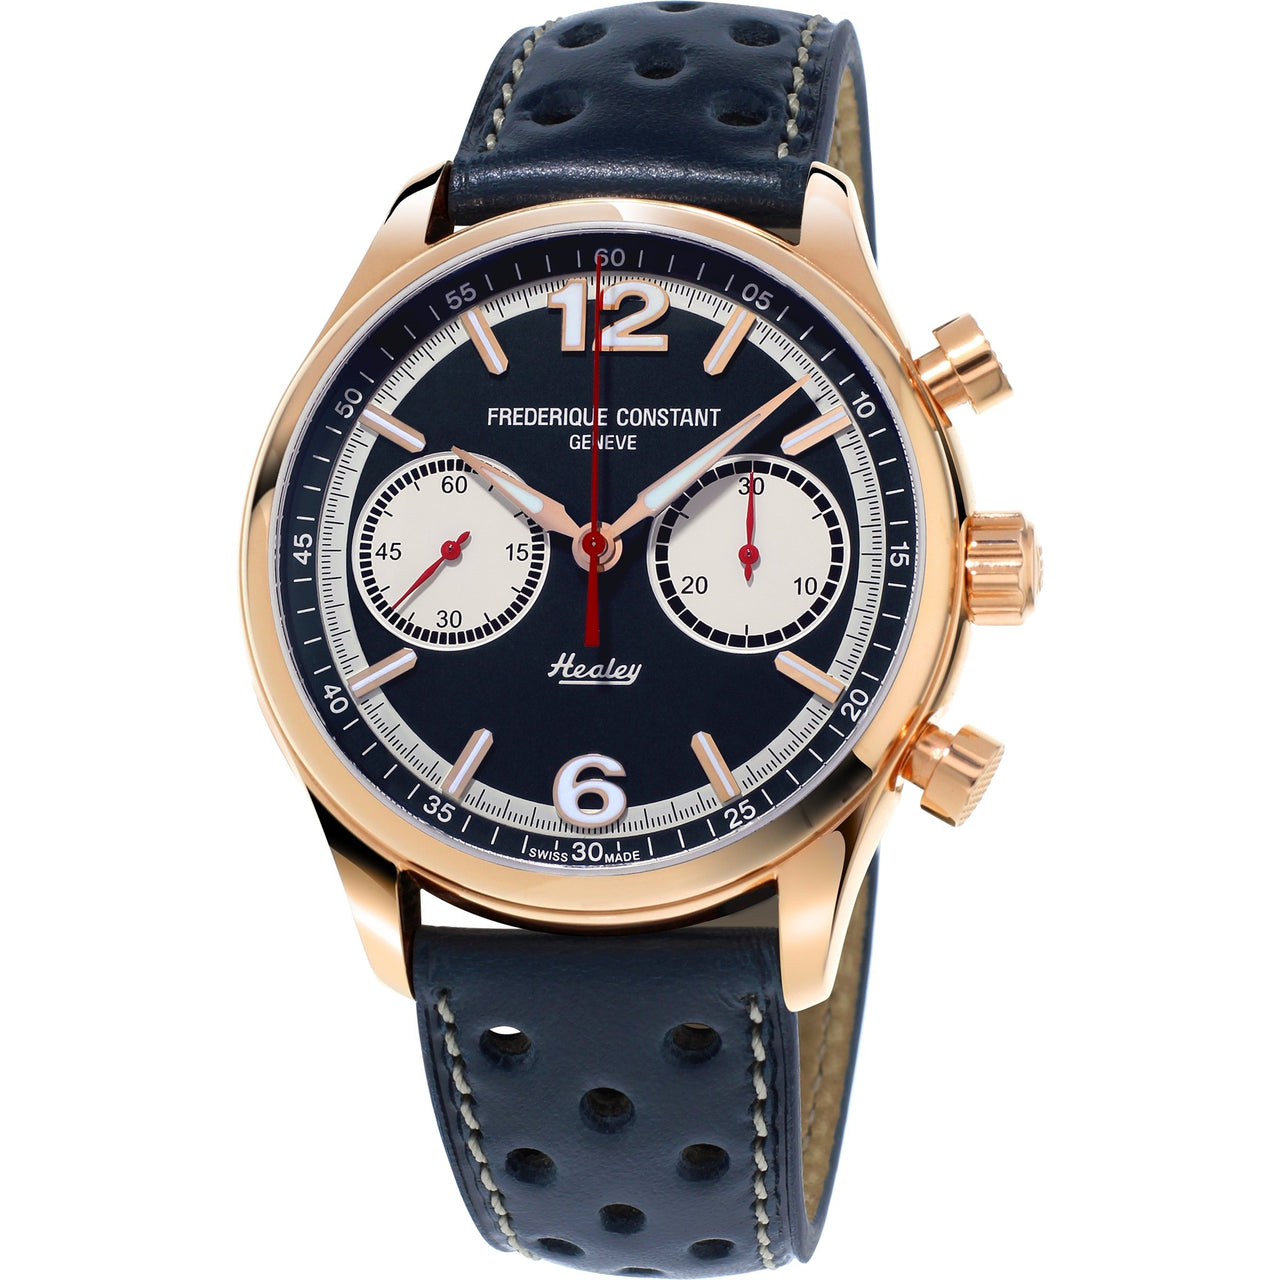 Frederique Constant Men's Healy Chronograph Watch - Watches & Crystals